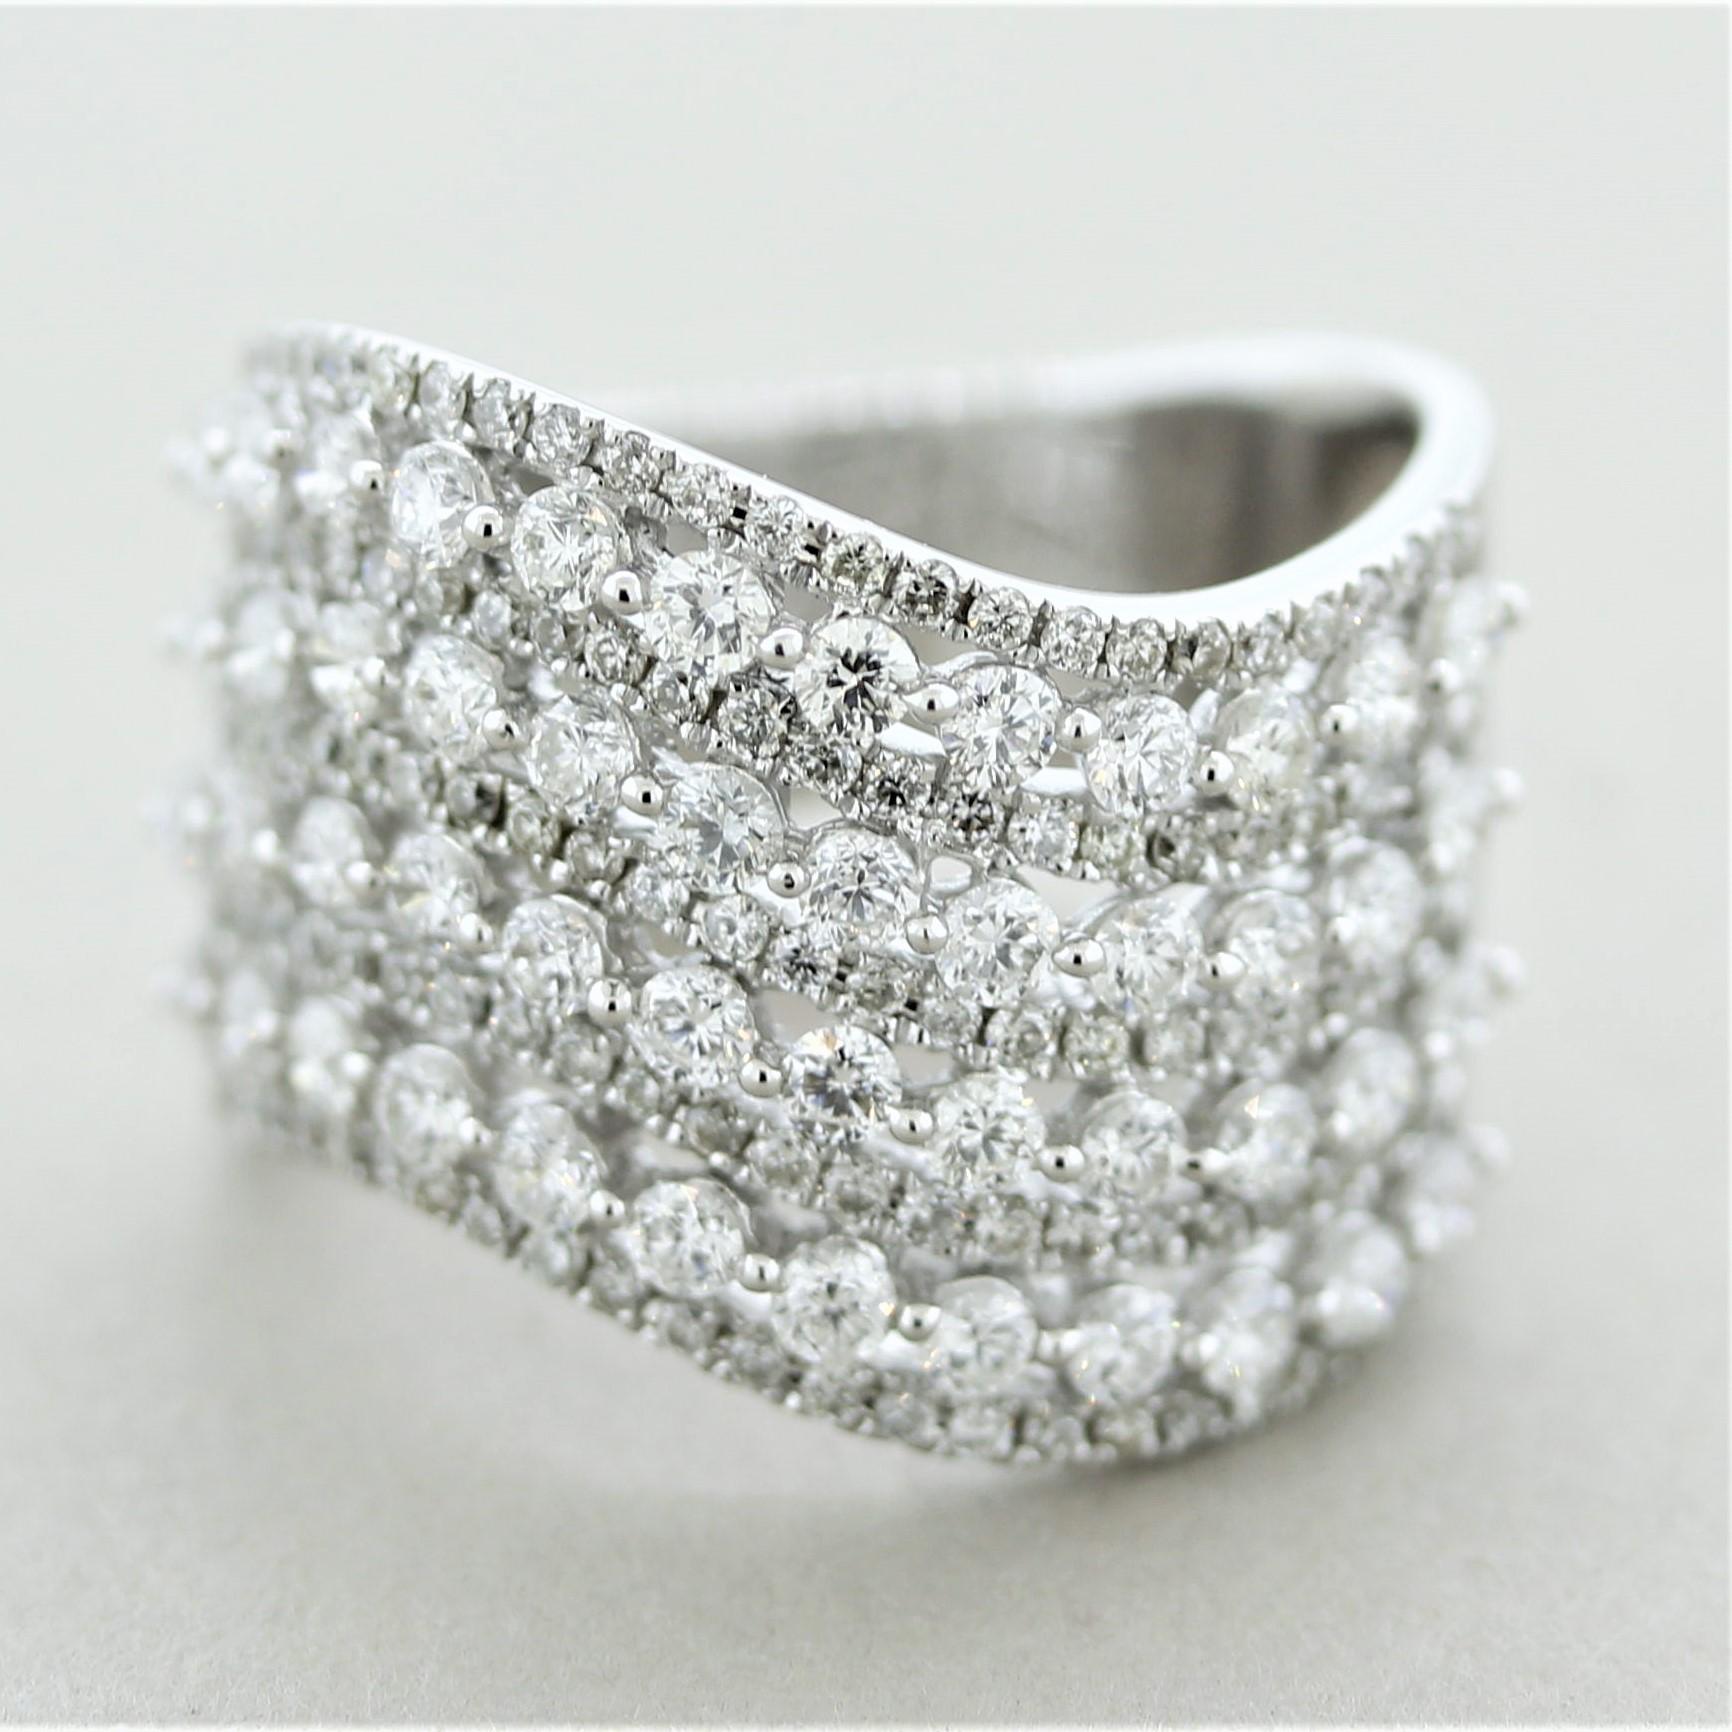 A stylish ring featuring rows of diamond waves over white gold. There are 2.43 carats of fine round brilliant-cut diamonds set in a stylish pattern alternating between larger and smaller sizes. Made in 18k white gold and ready to be worn.

Ring Size